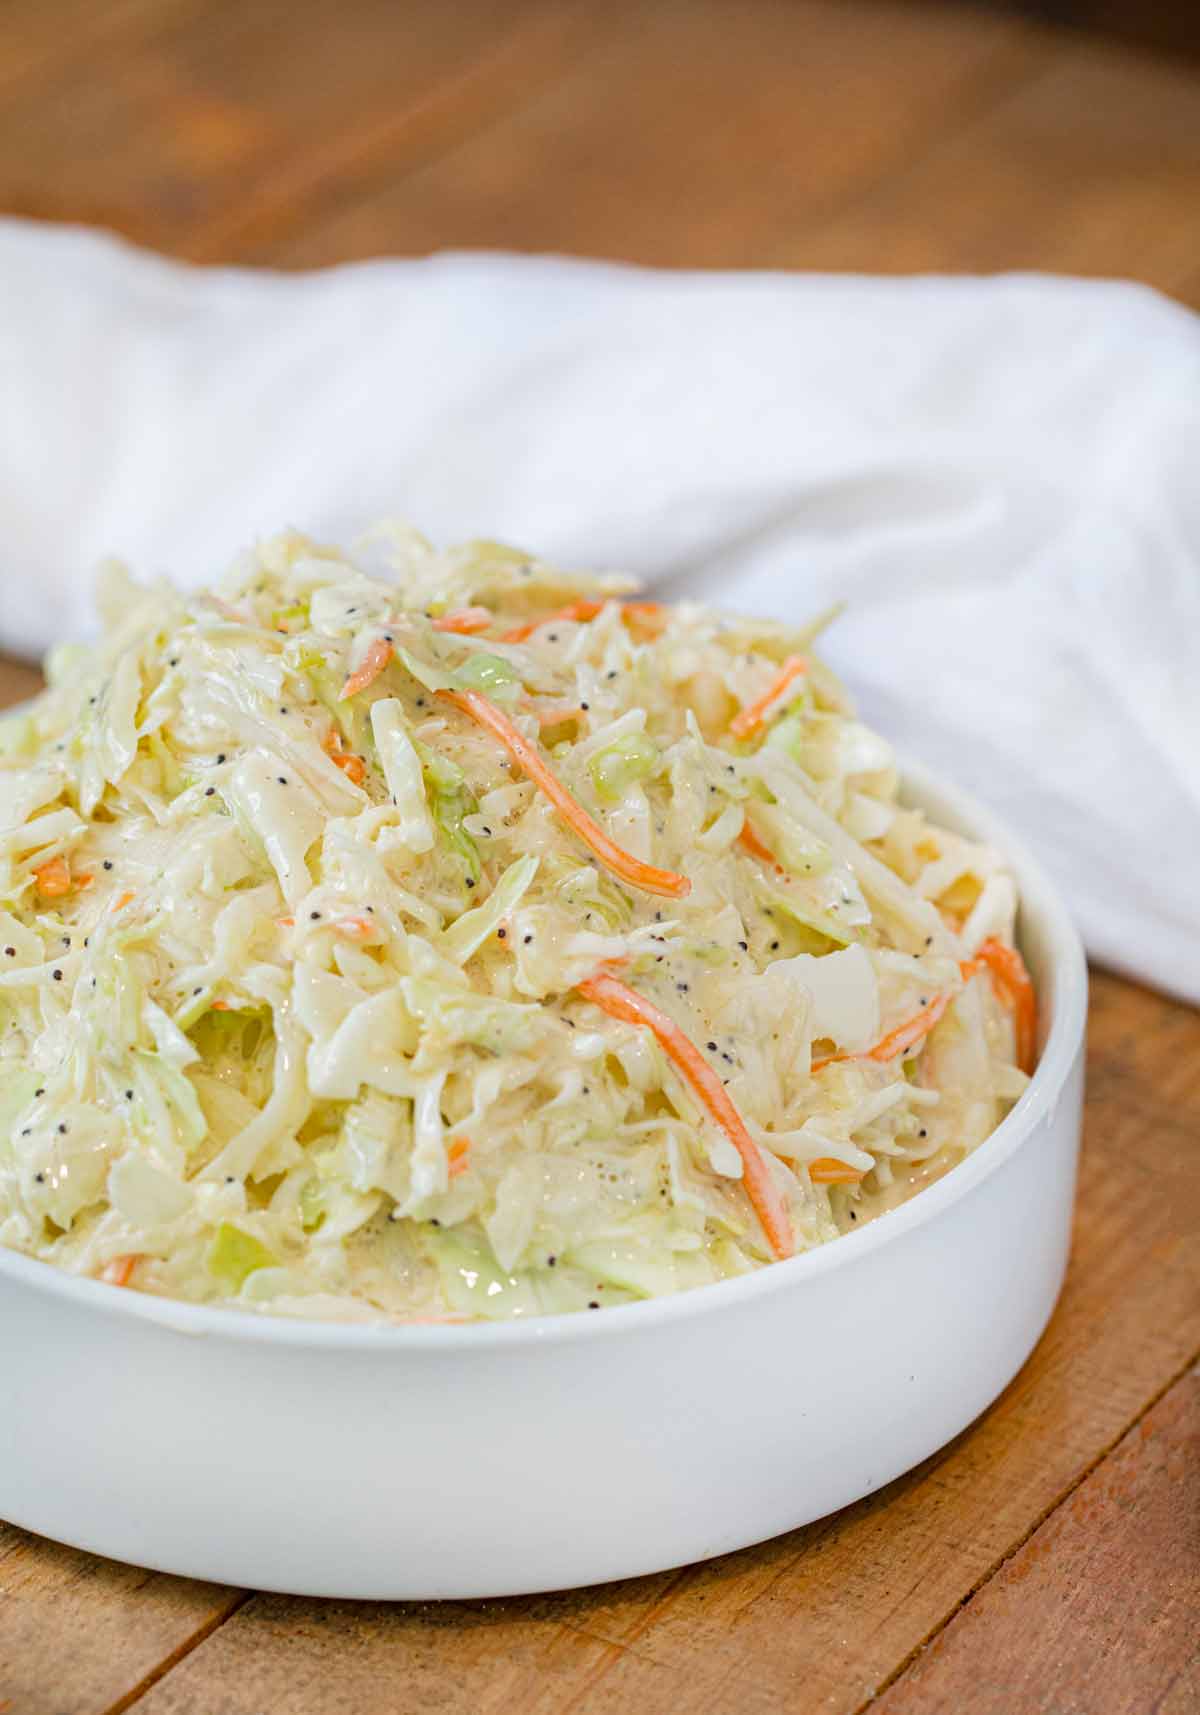 How to Make Coleslaw Without a Recipe